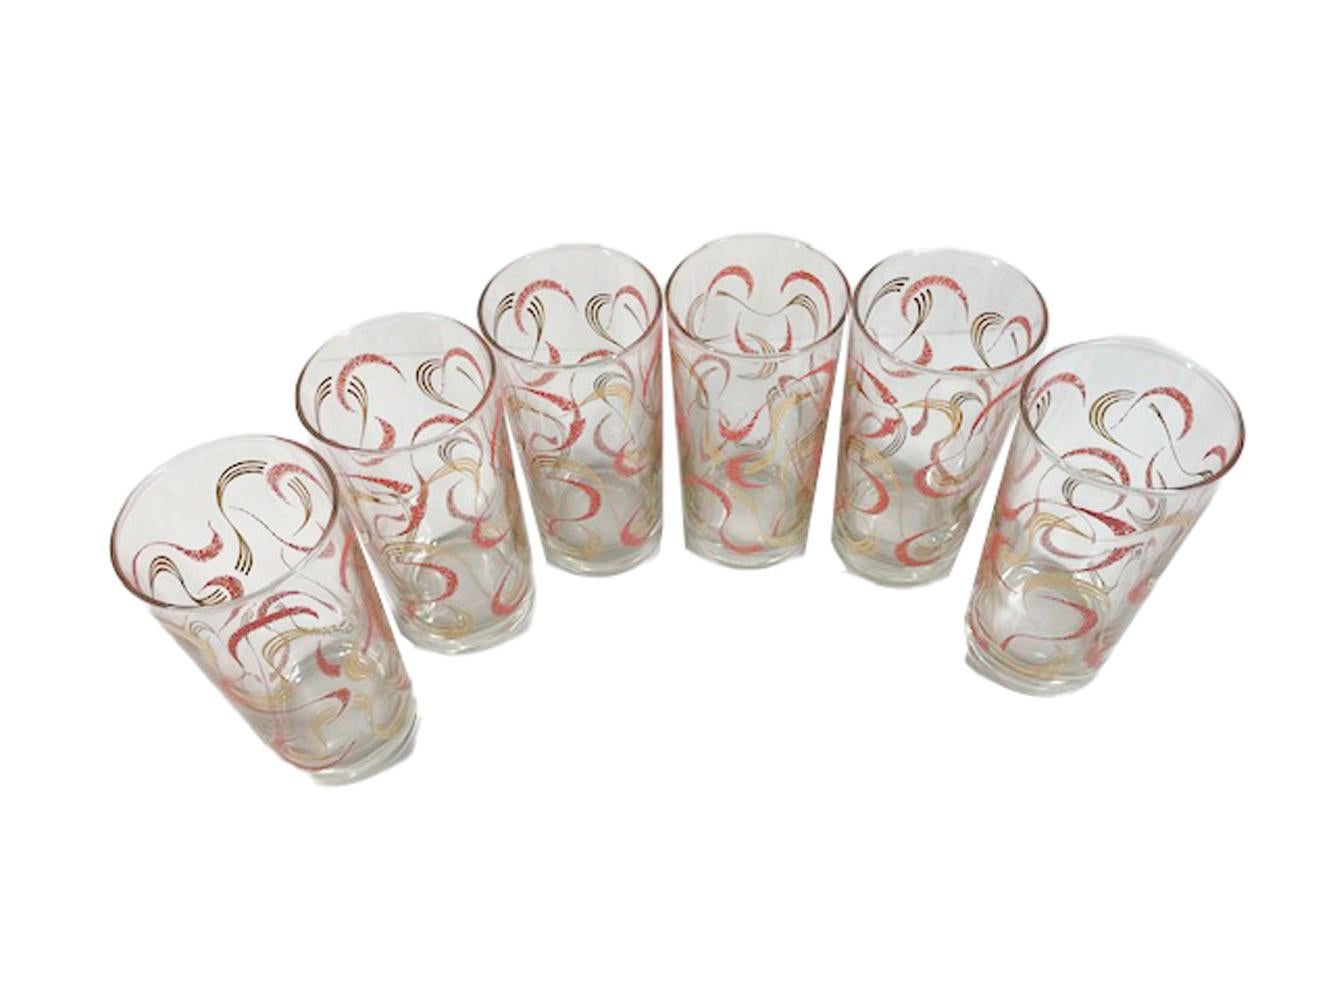 Six Mid-Century Modern highball glasses in the atomic style decorated with 22k gold and pink enamel streamers.